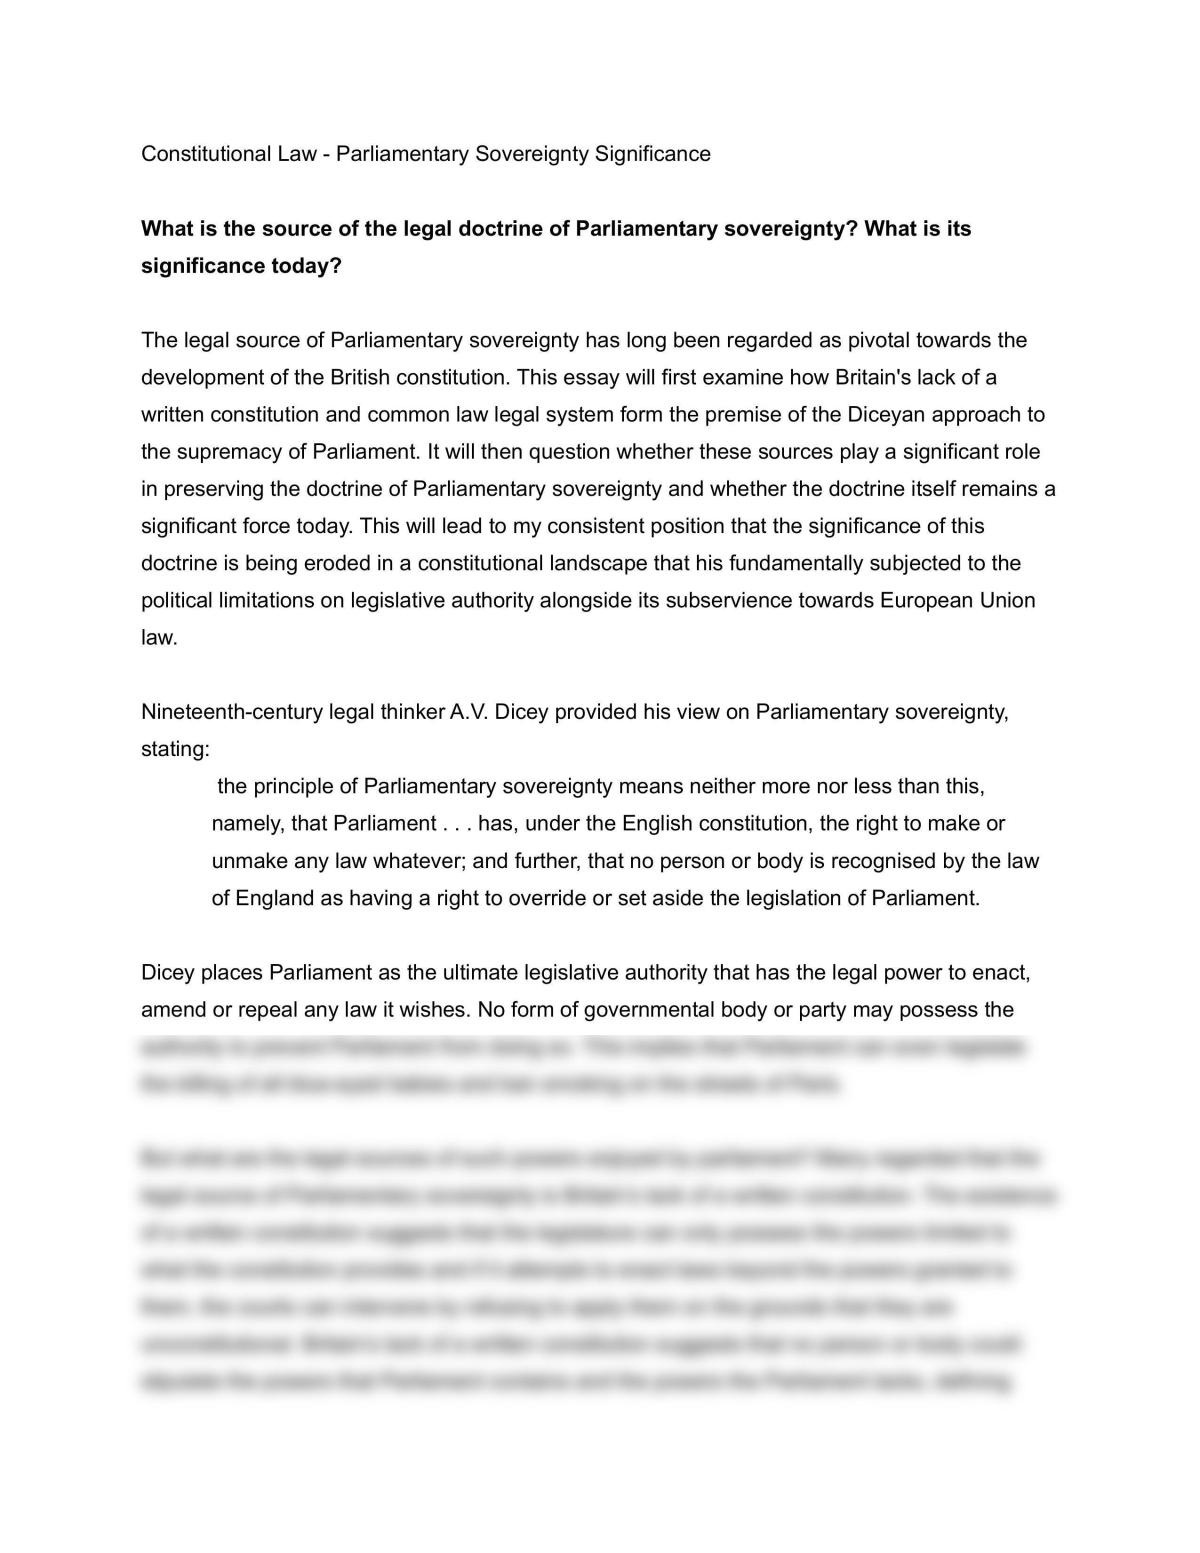 Significance of Parliamentary Sovereignty Essay - Page 1